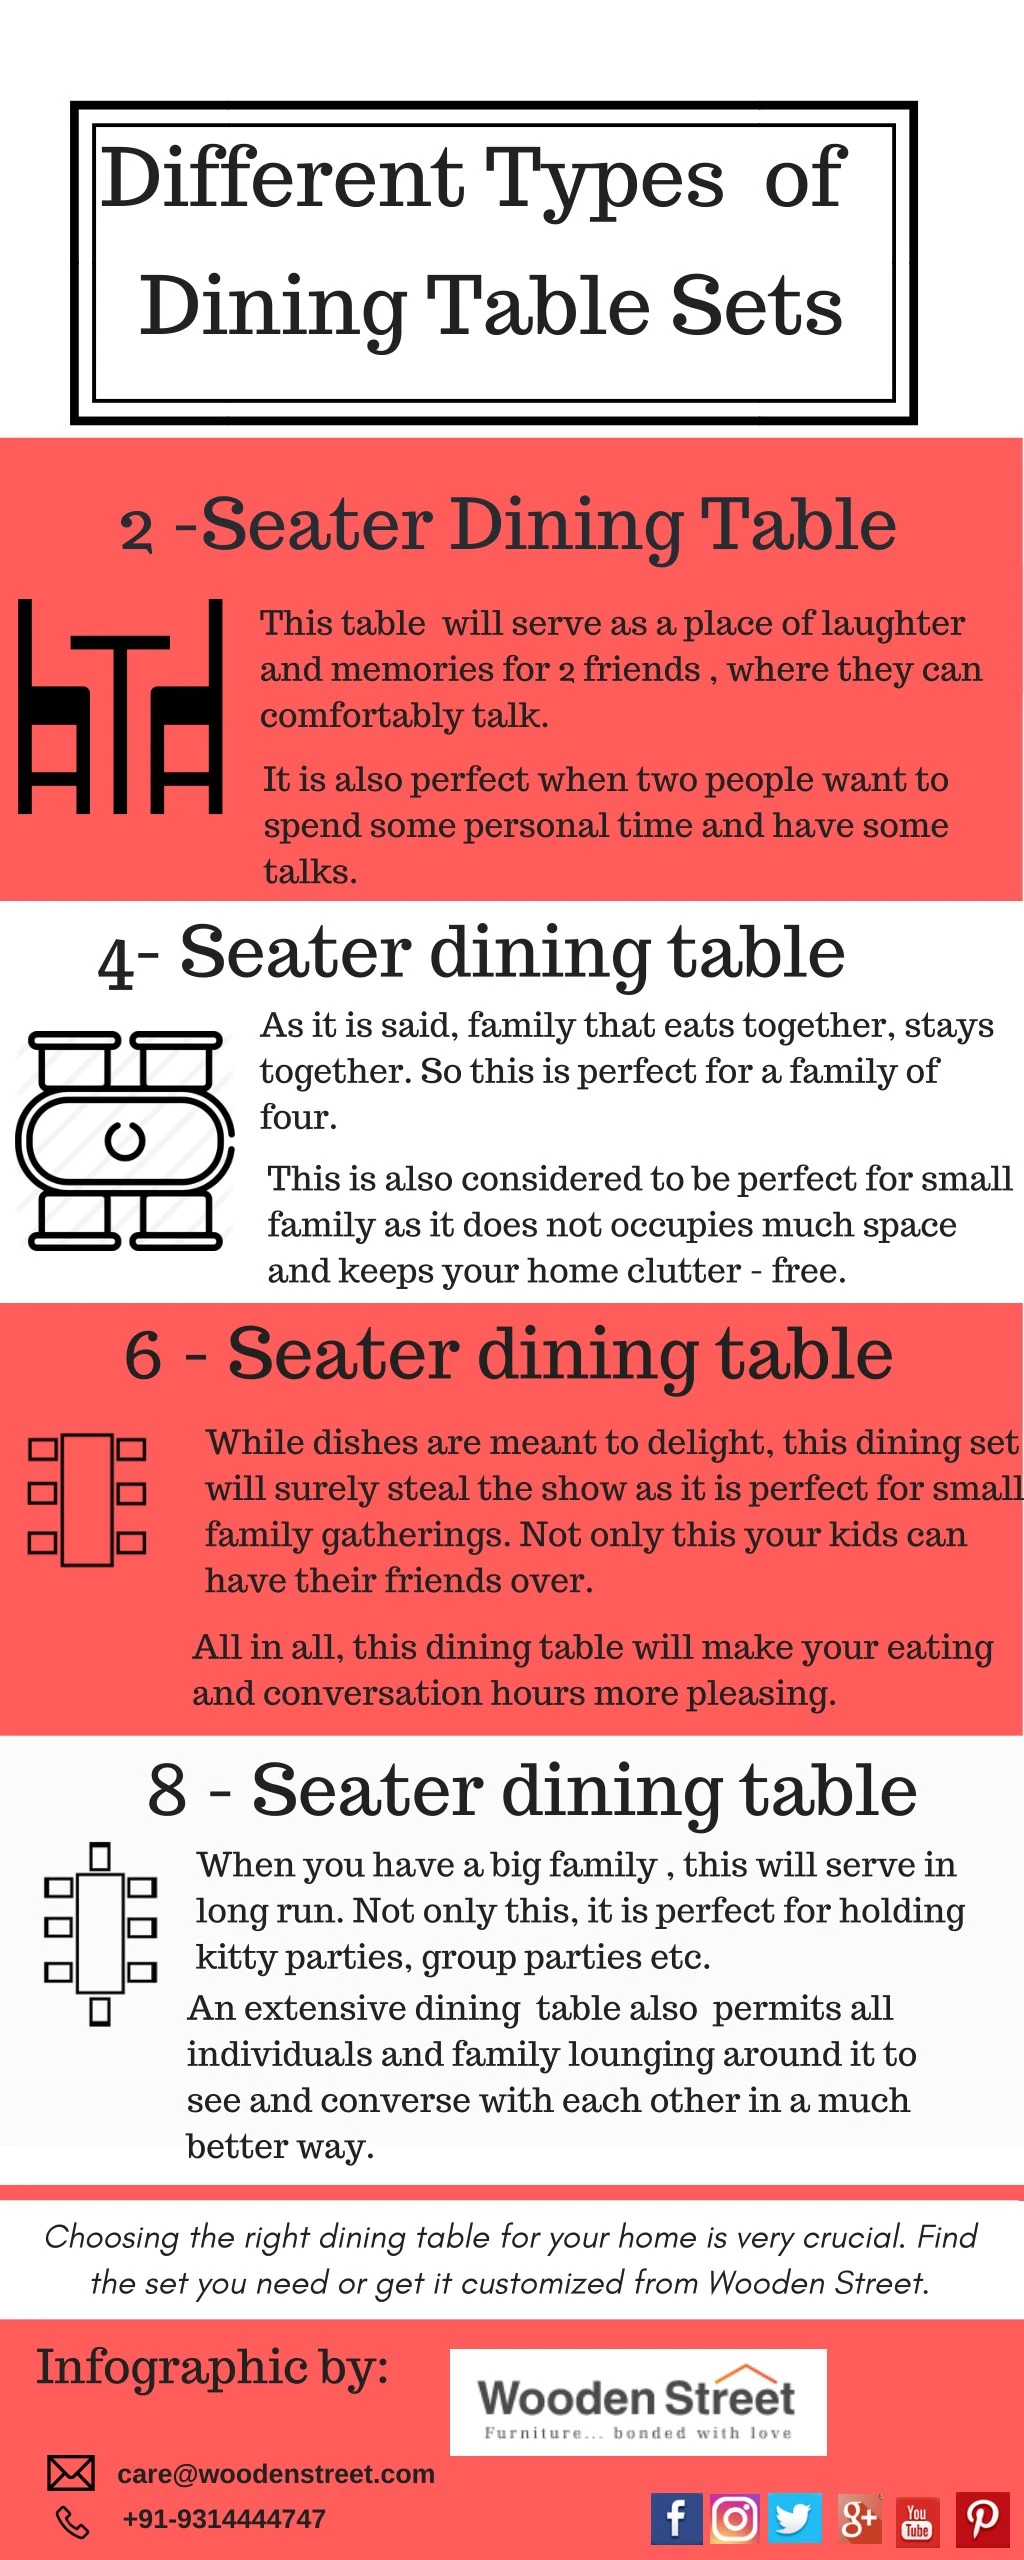 different types of dining table sets